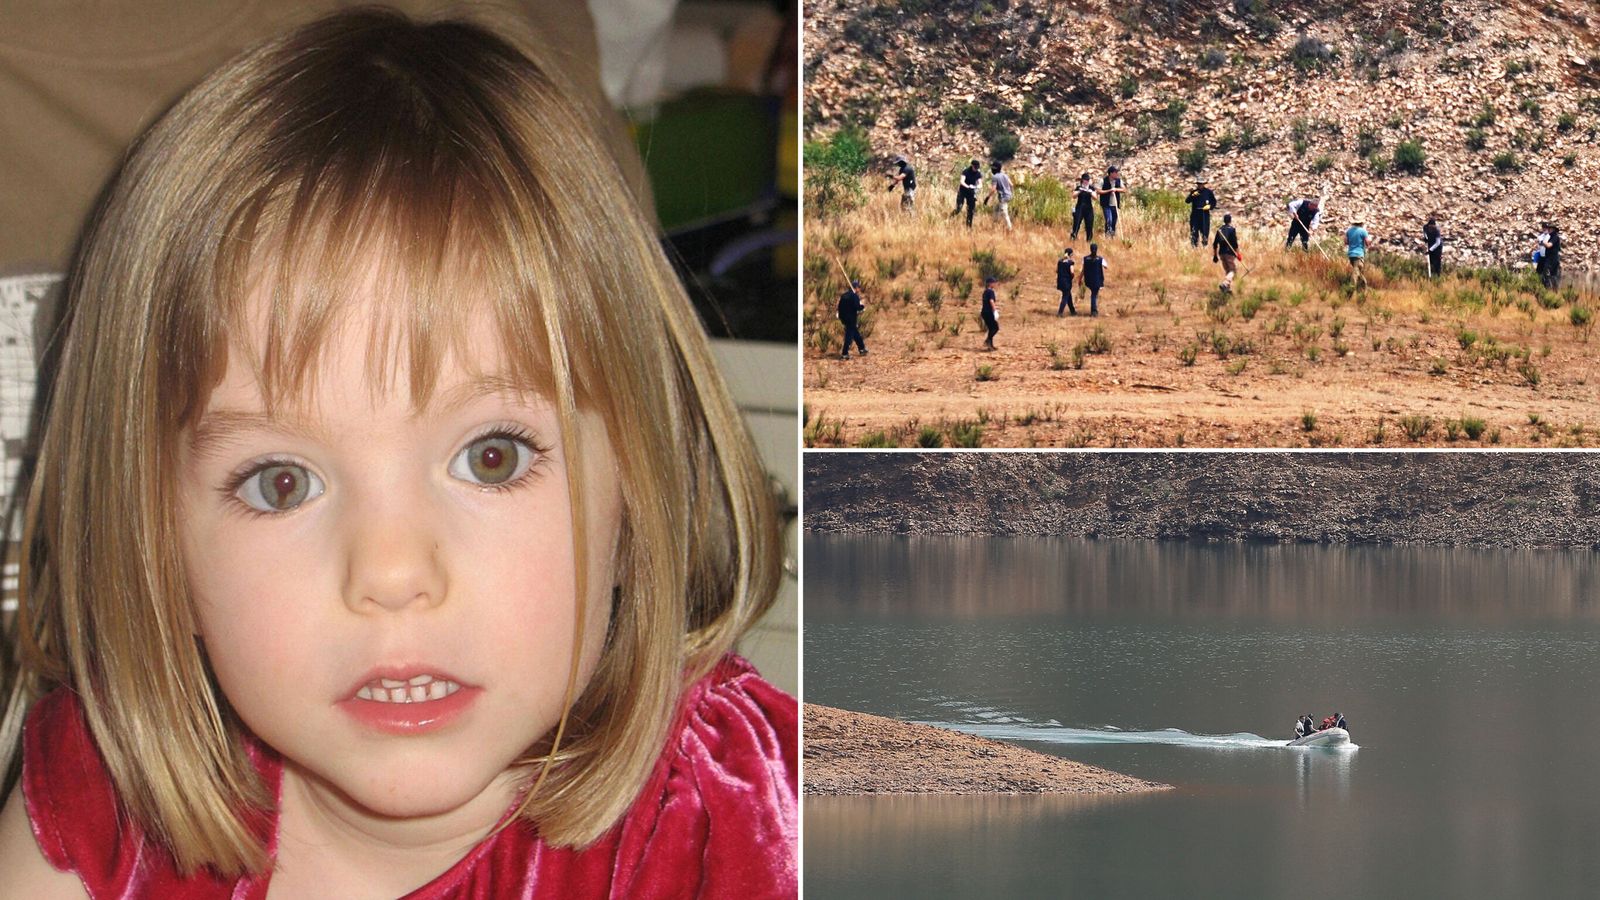 Madeleine McCann police remove bags during reservoir search